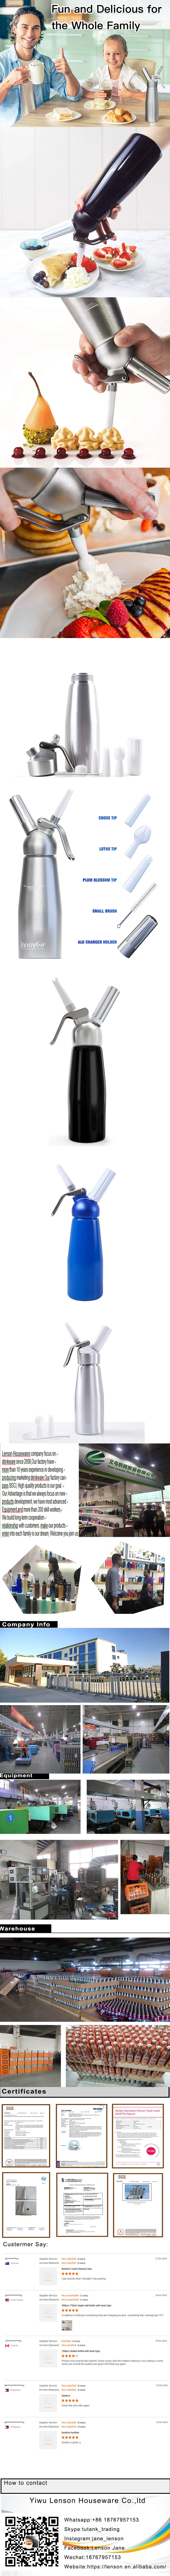 Professional Cream Chargers Nitrous Oxide Stainless Steel Cream Dispenser